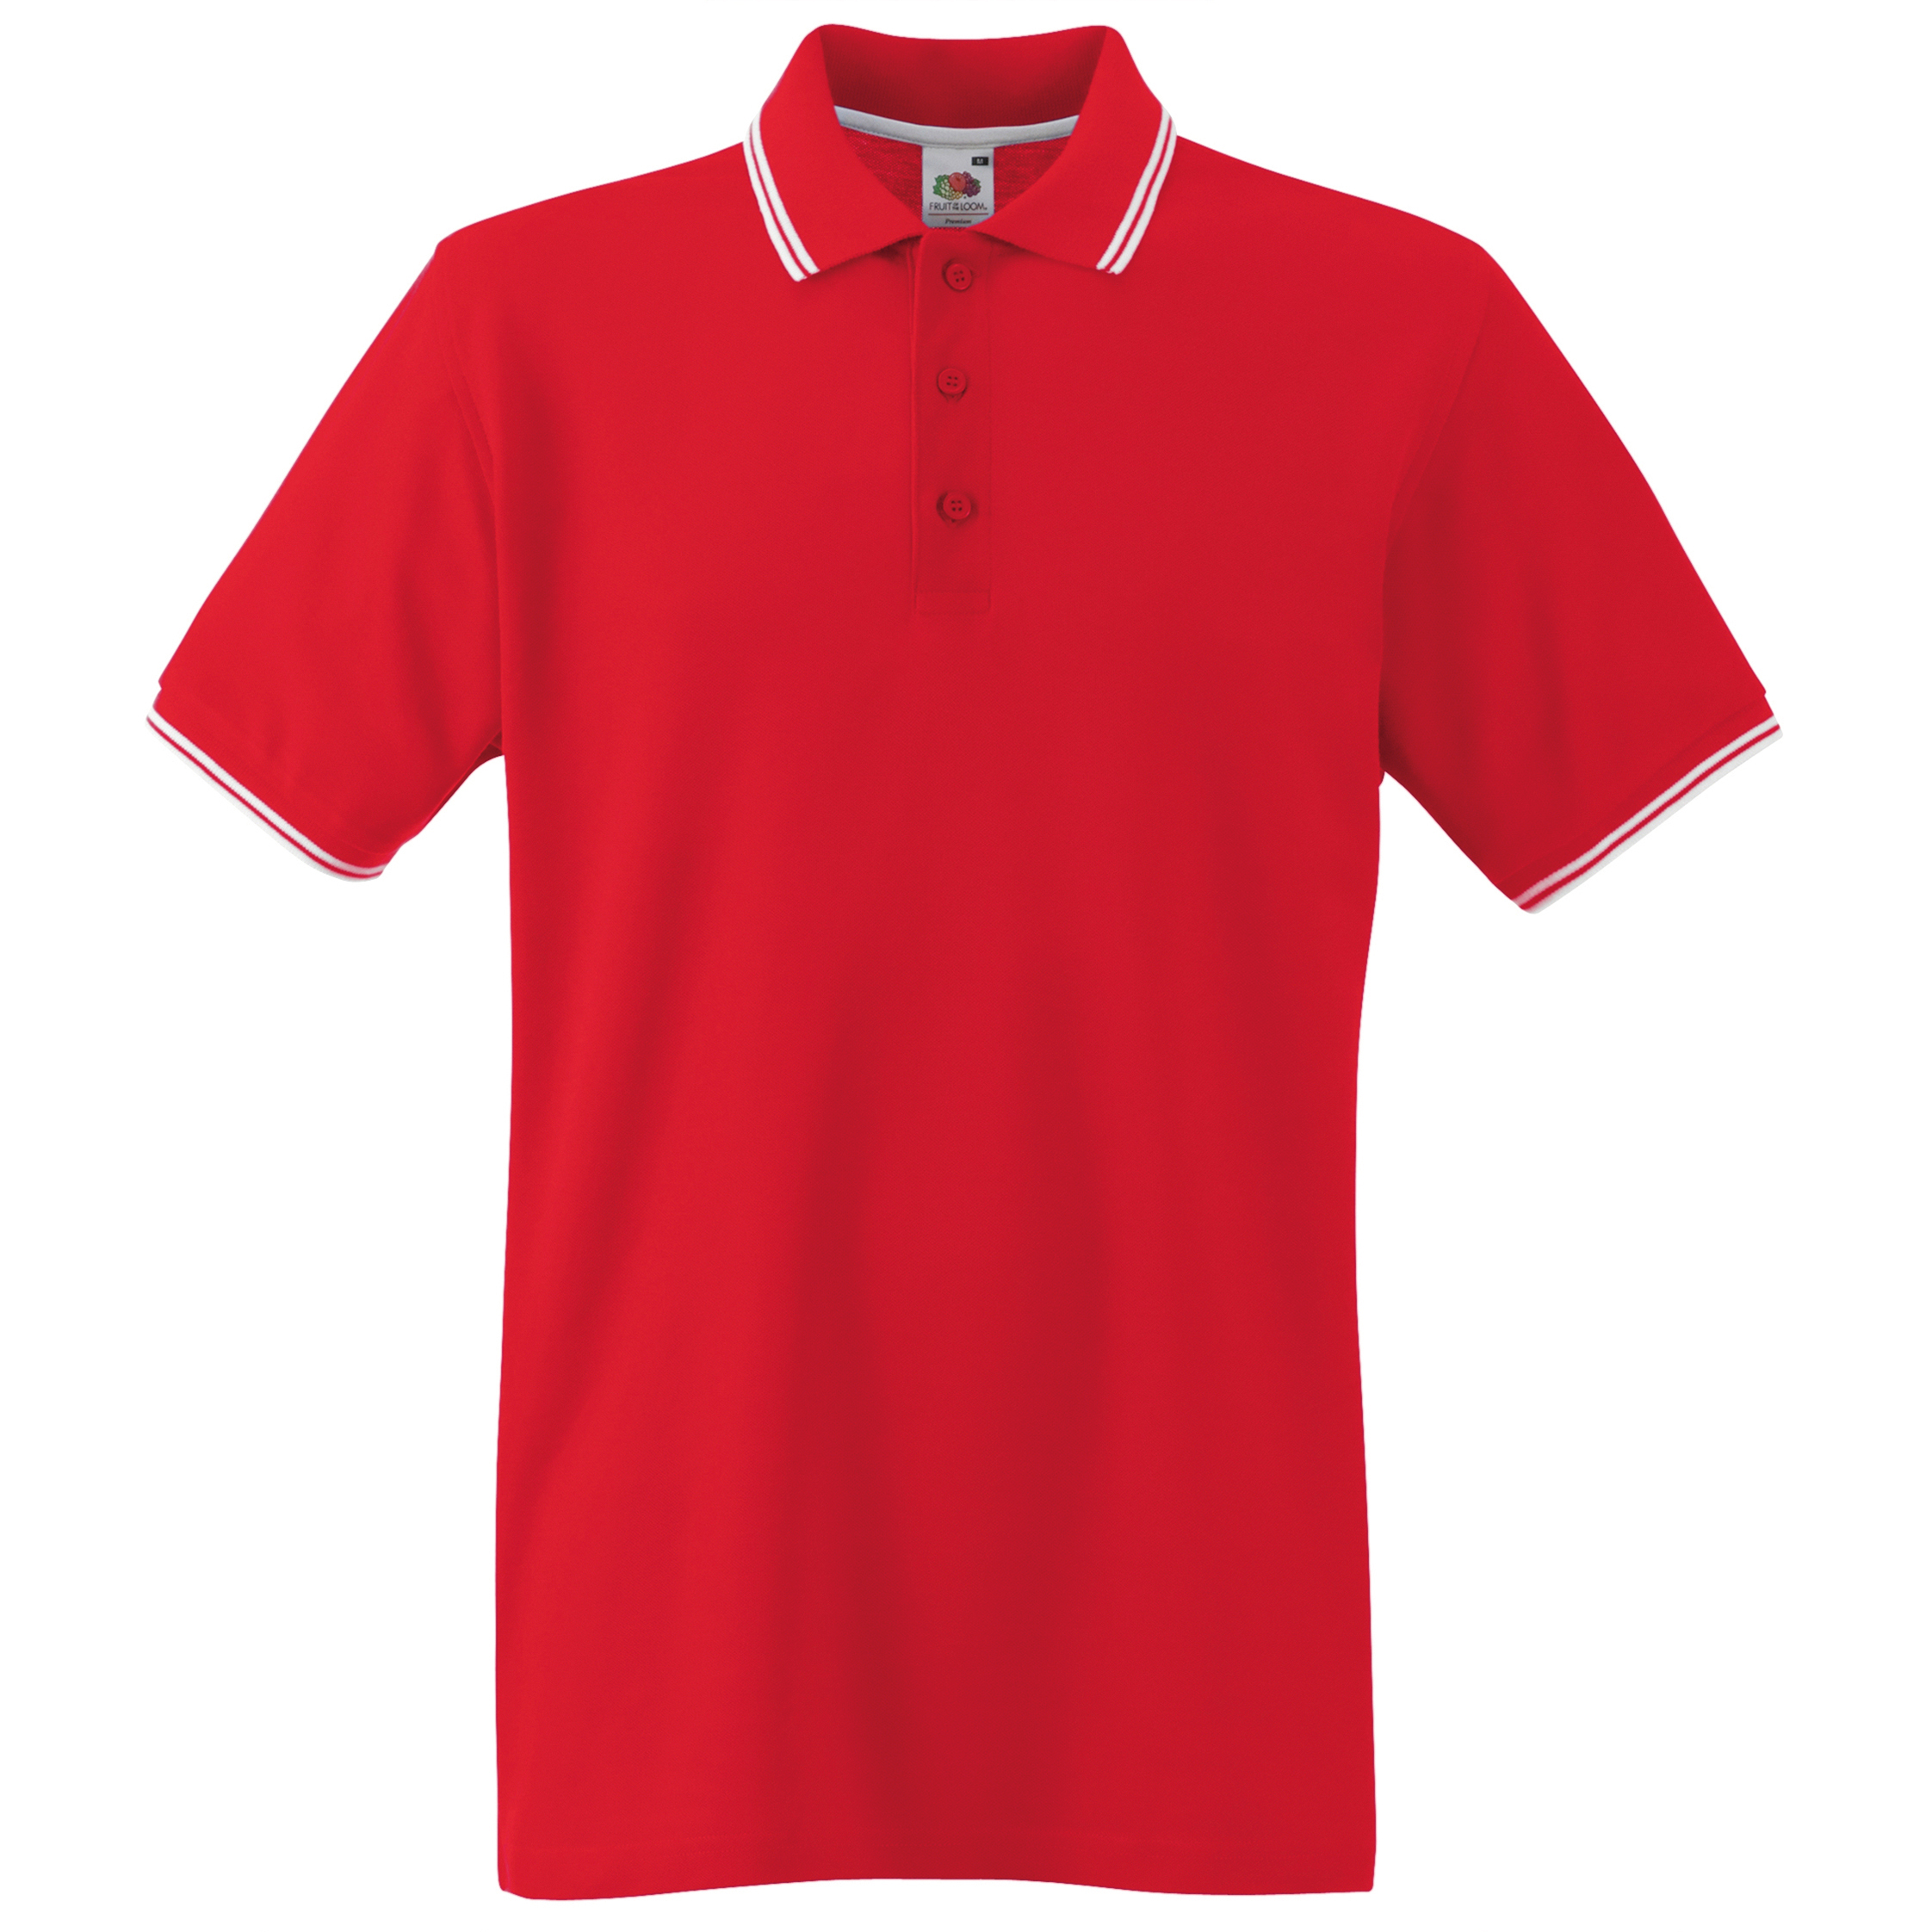 ax-httpswebsystems.s3.amazonaws.comtmp_for_downloadtipped-polo-red-white.jpg